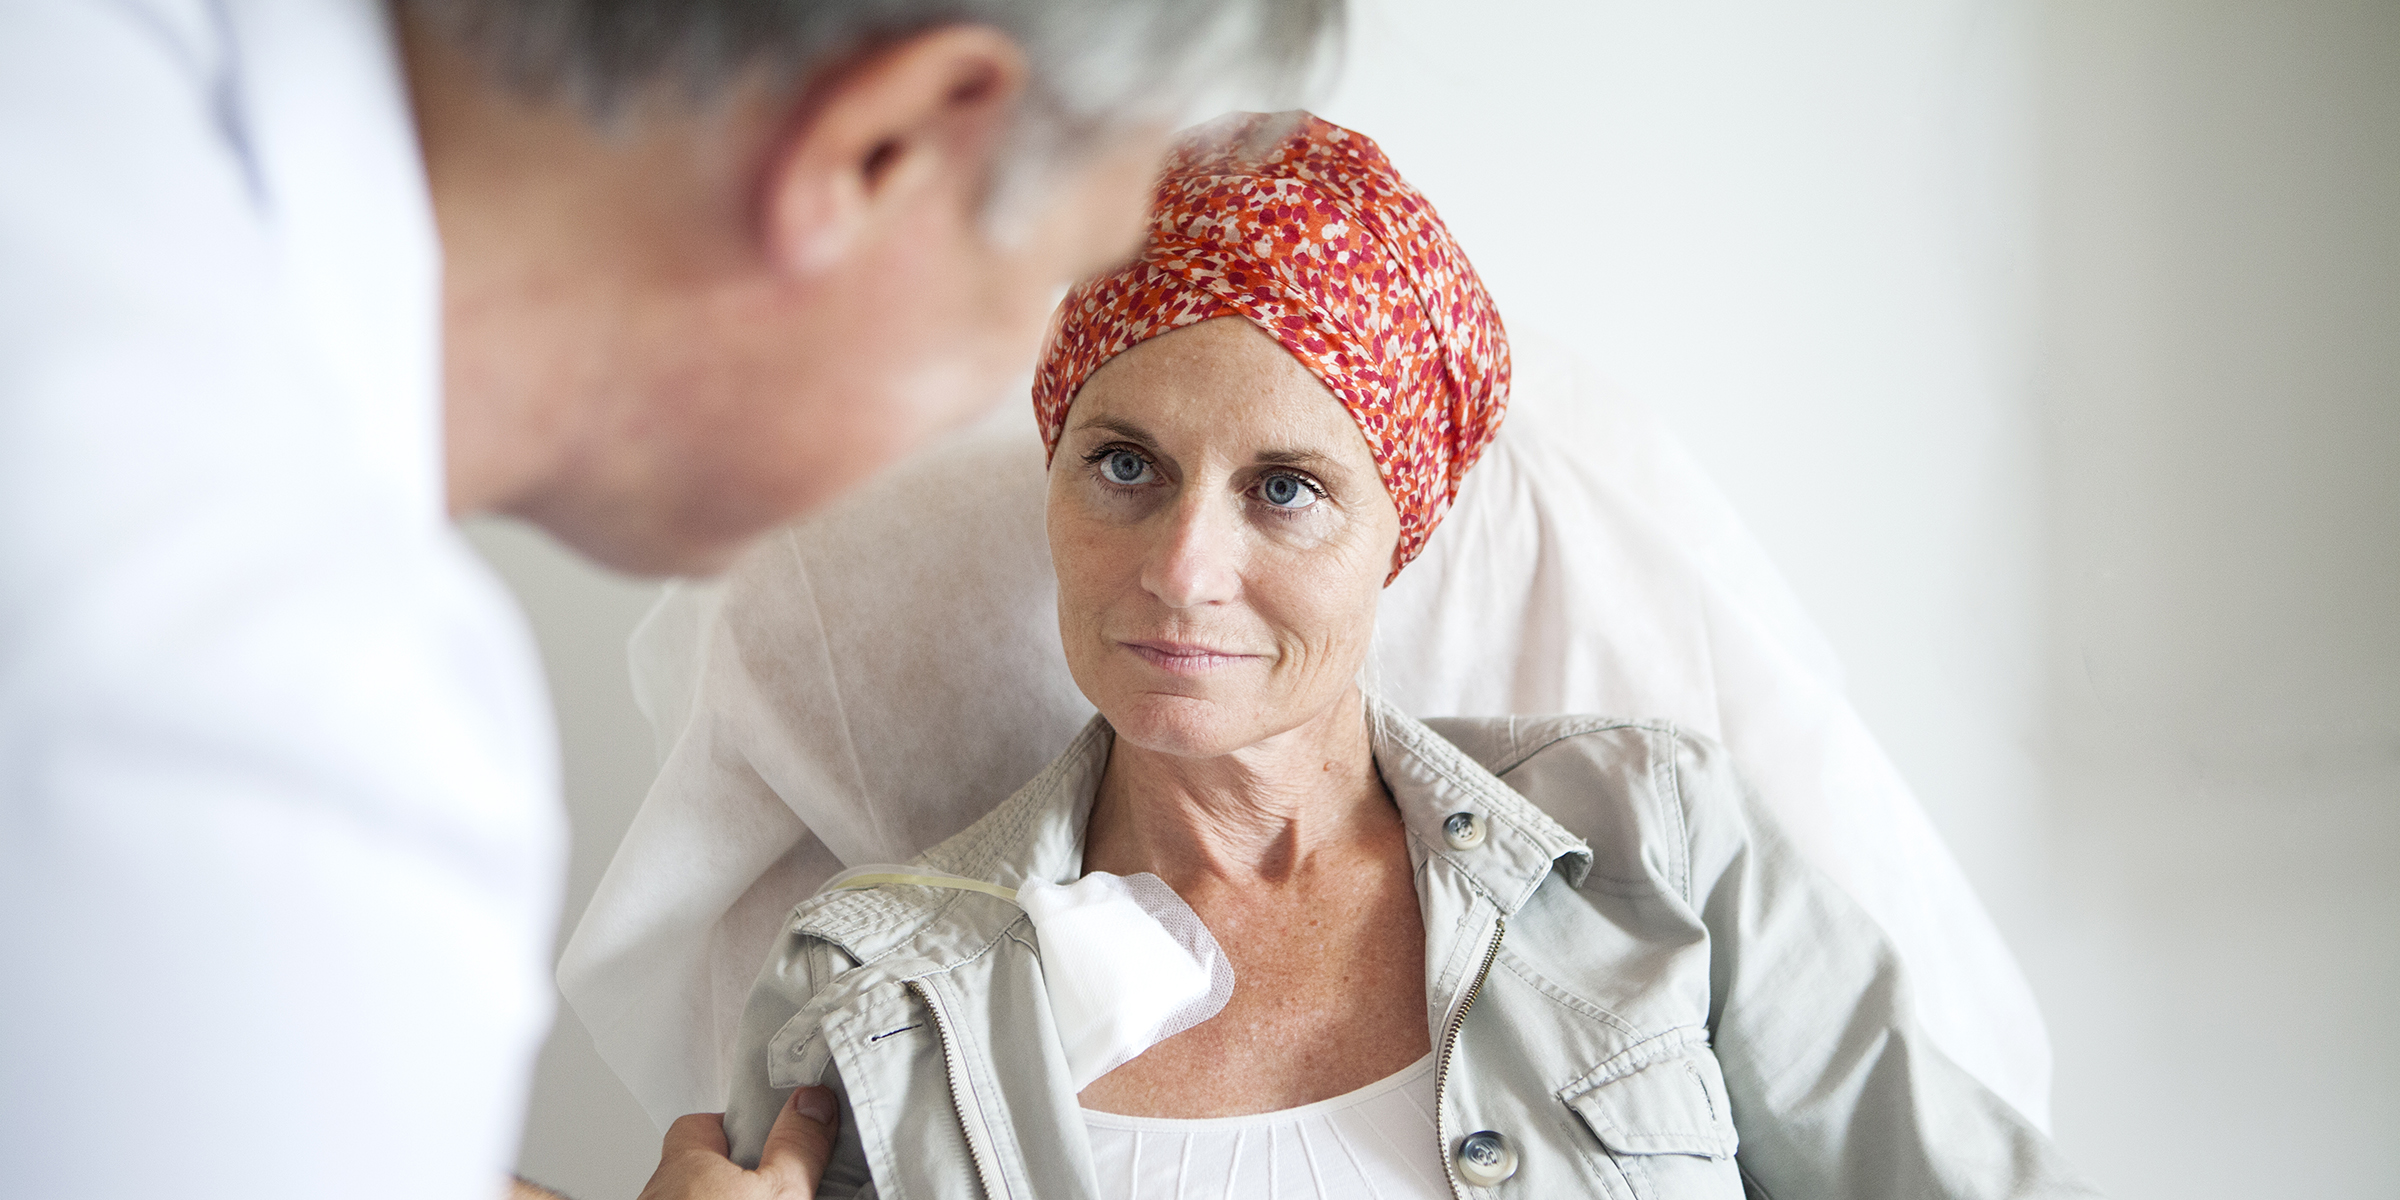 Woman with red scarf on her head talking to a doctor